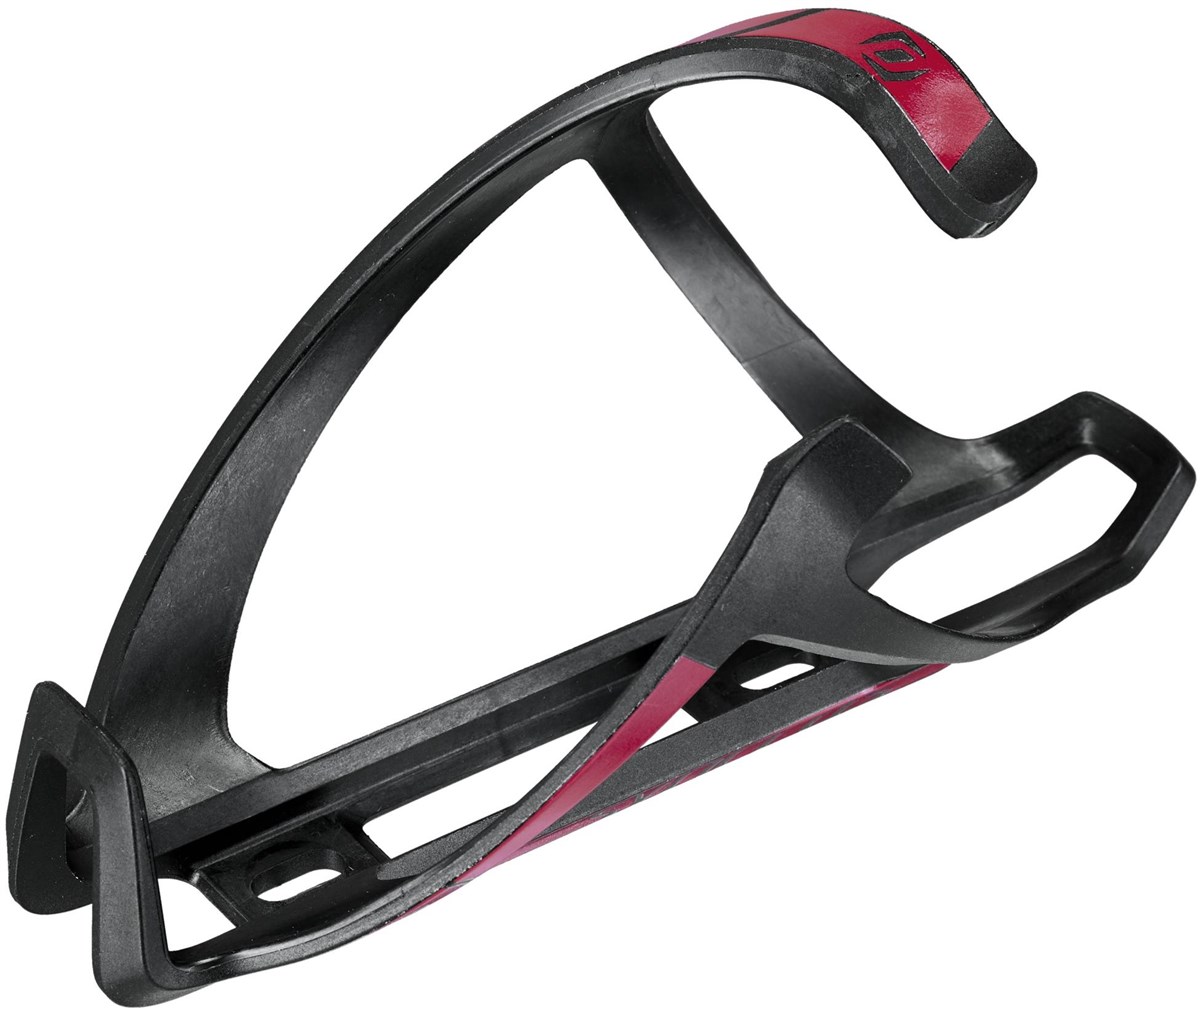 Syncros Tailor 2.0 Bottle Cage - Right product image